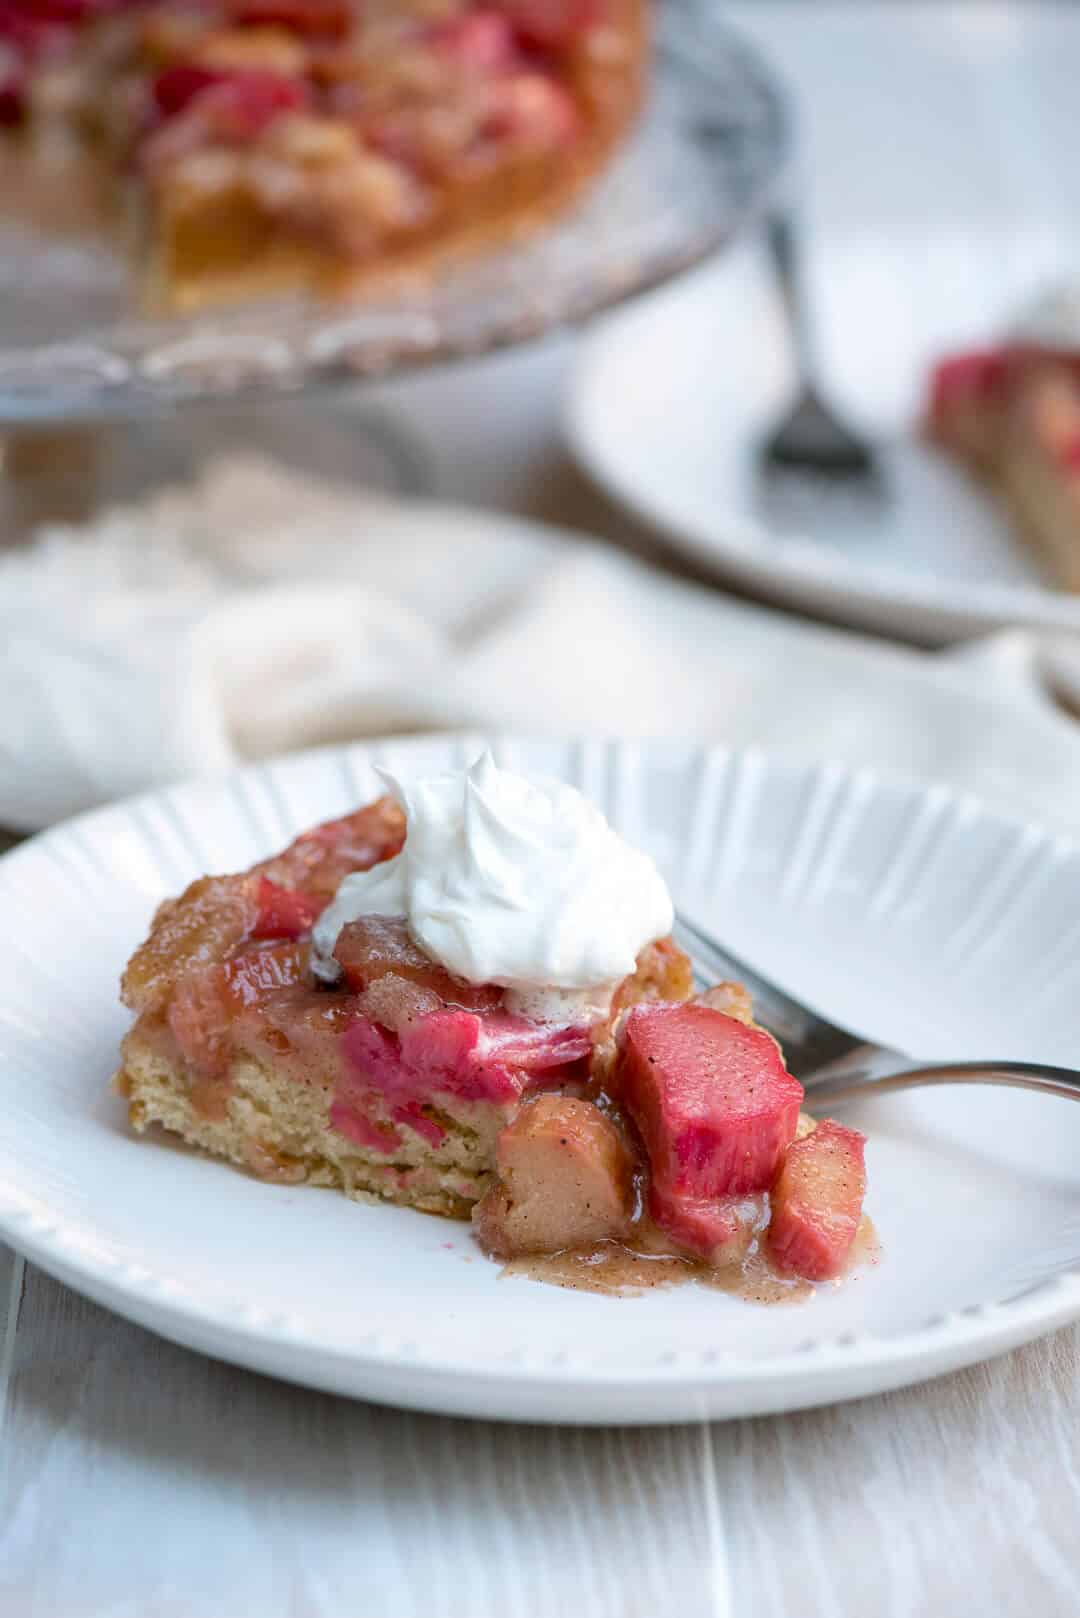 A slice of Rhubarb Upside Down Cake topped with whipped cream on a white serving plate with a fork.